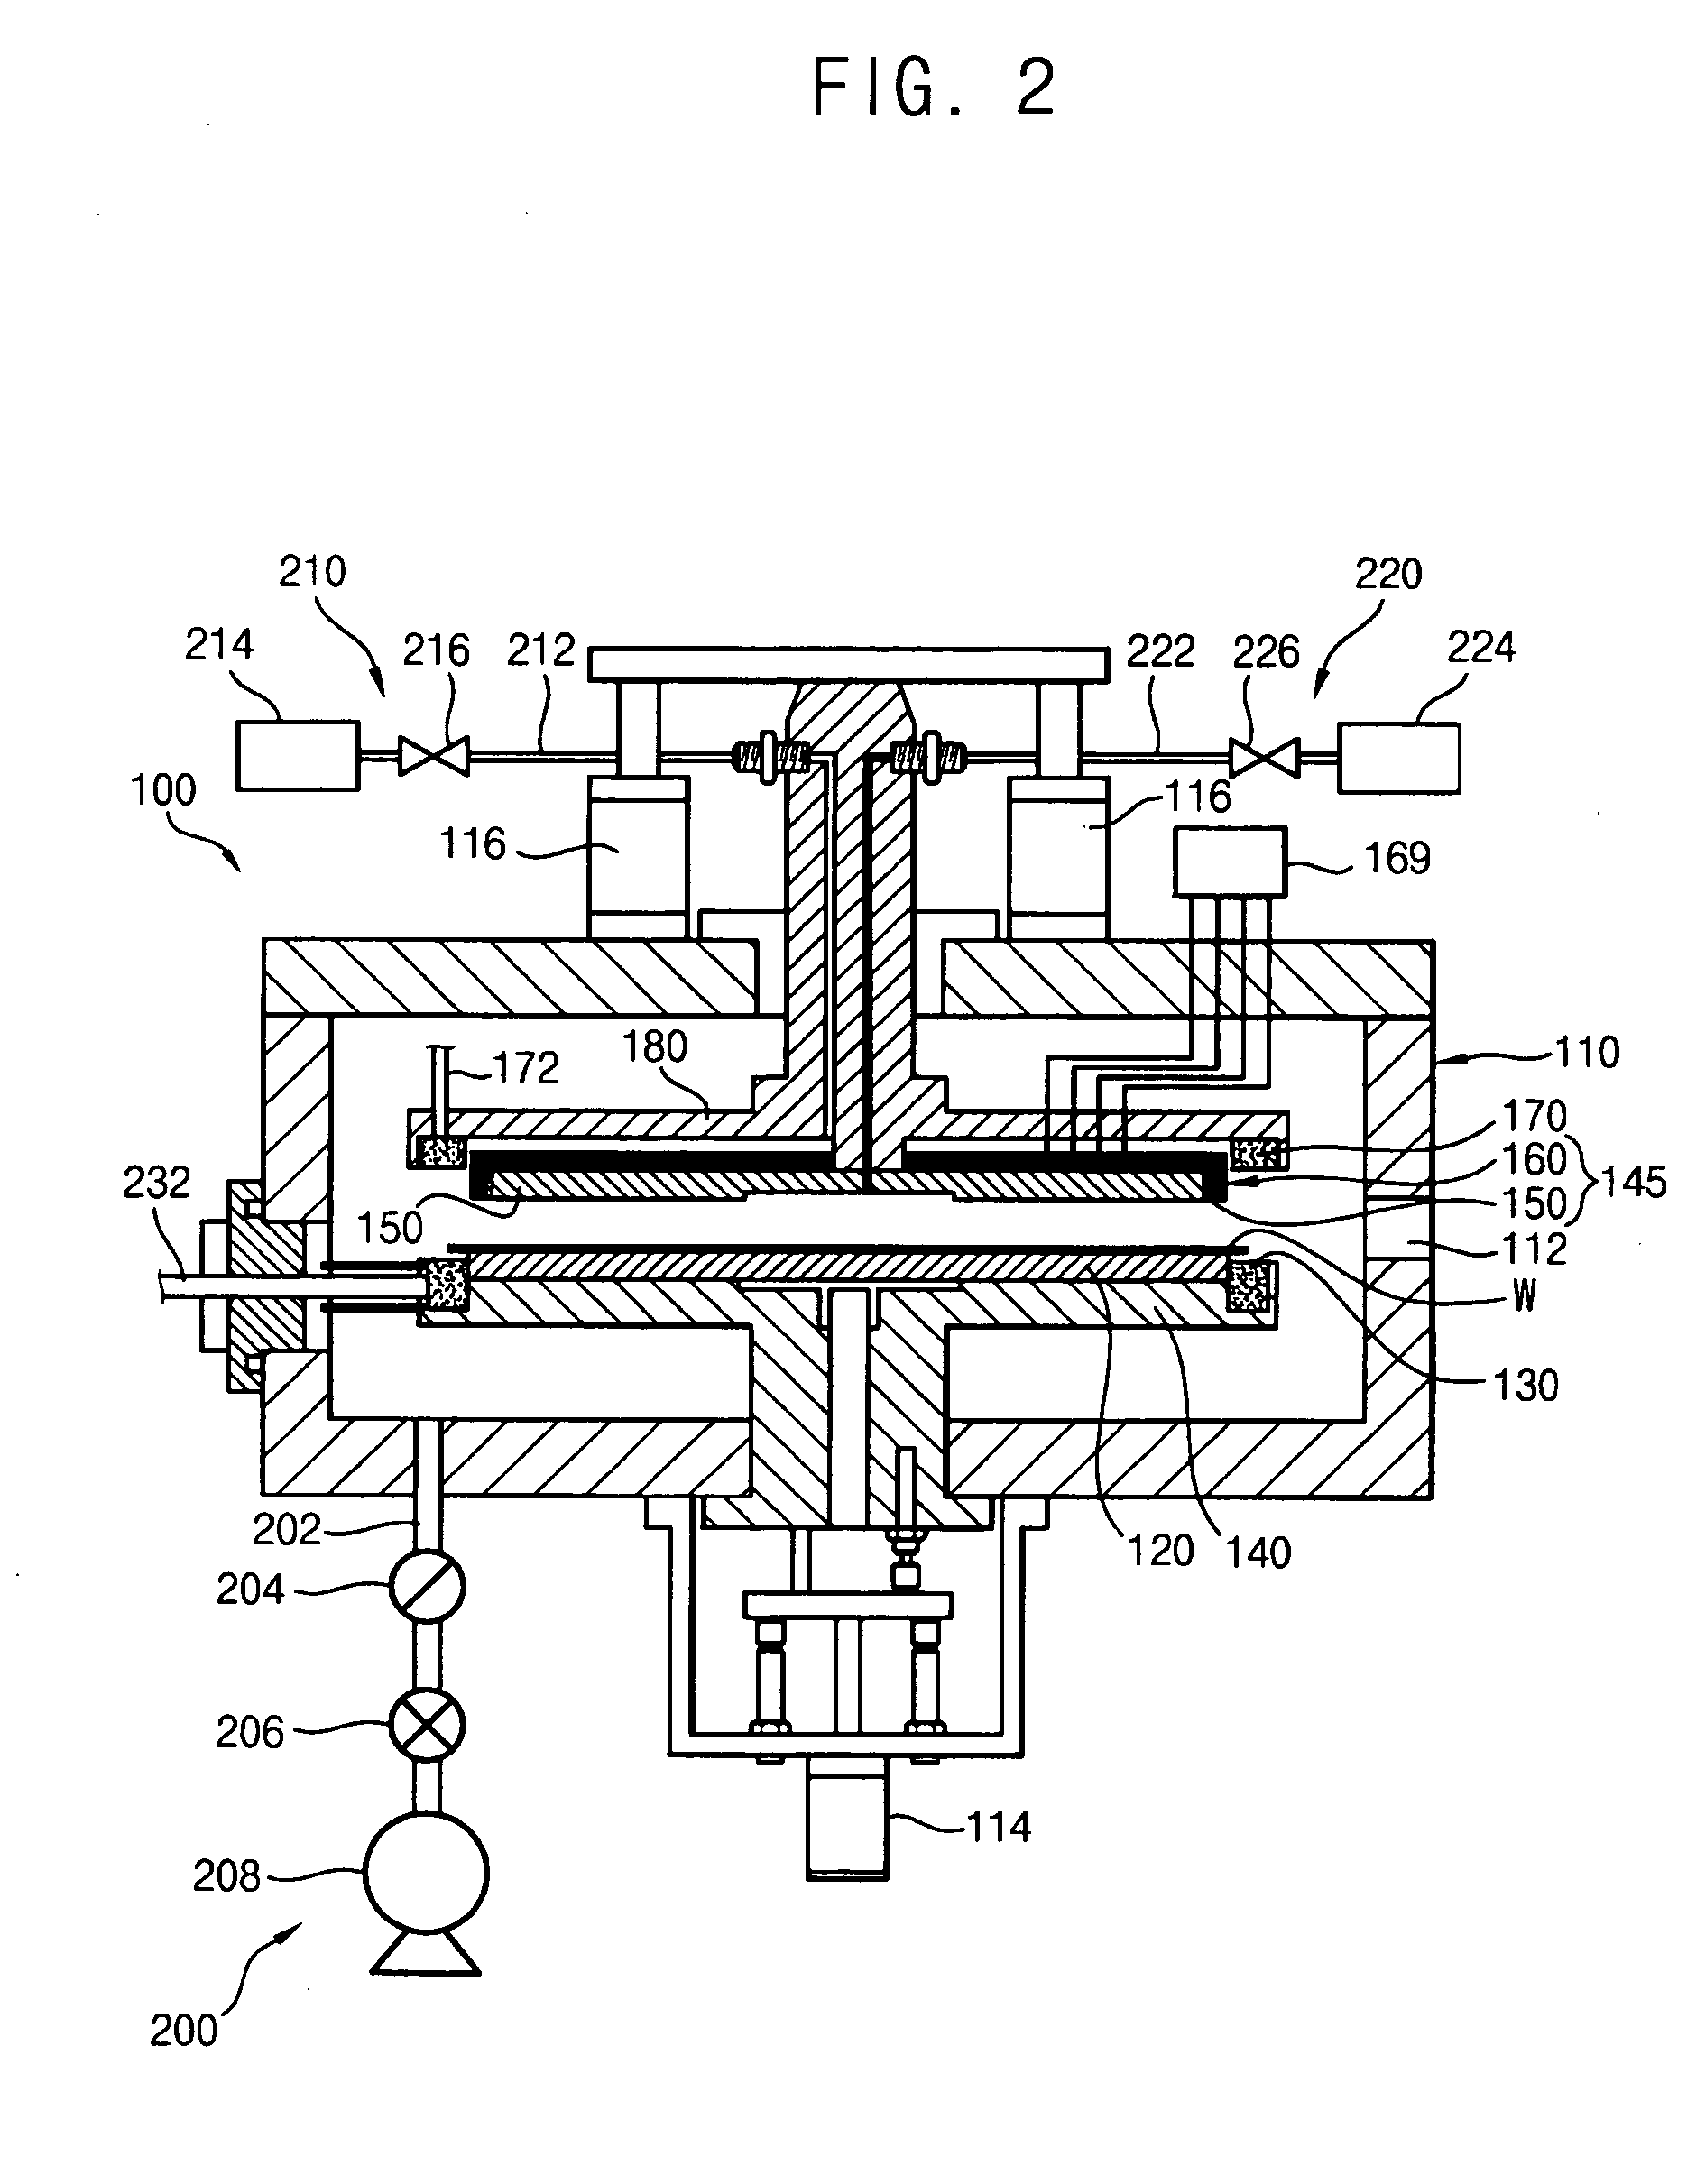 Adjustable shielding plate for adjusting an etching area of a semiconductor wafer and related apparatus and methods